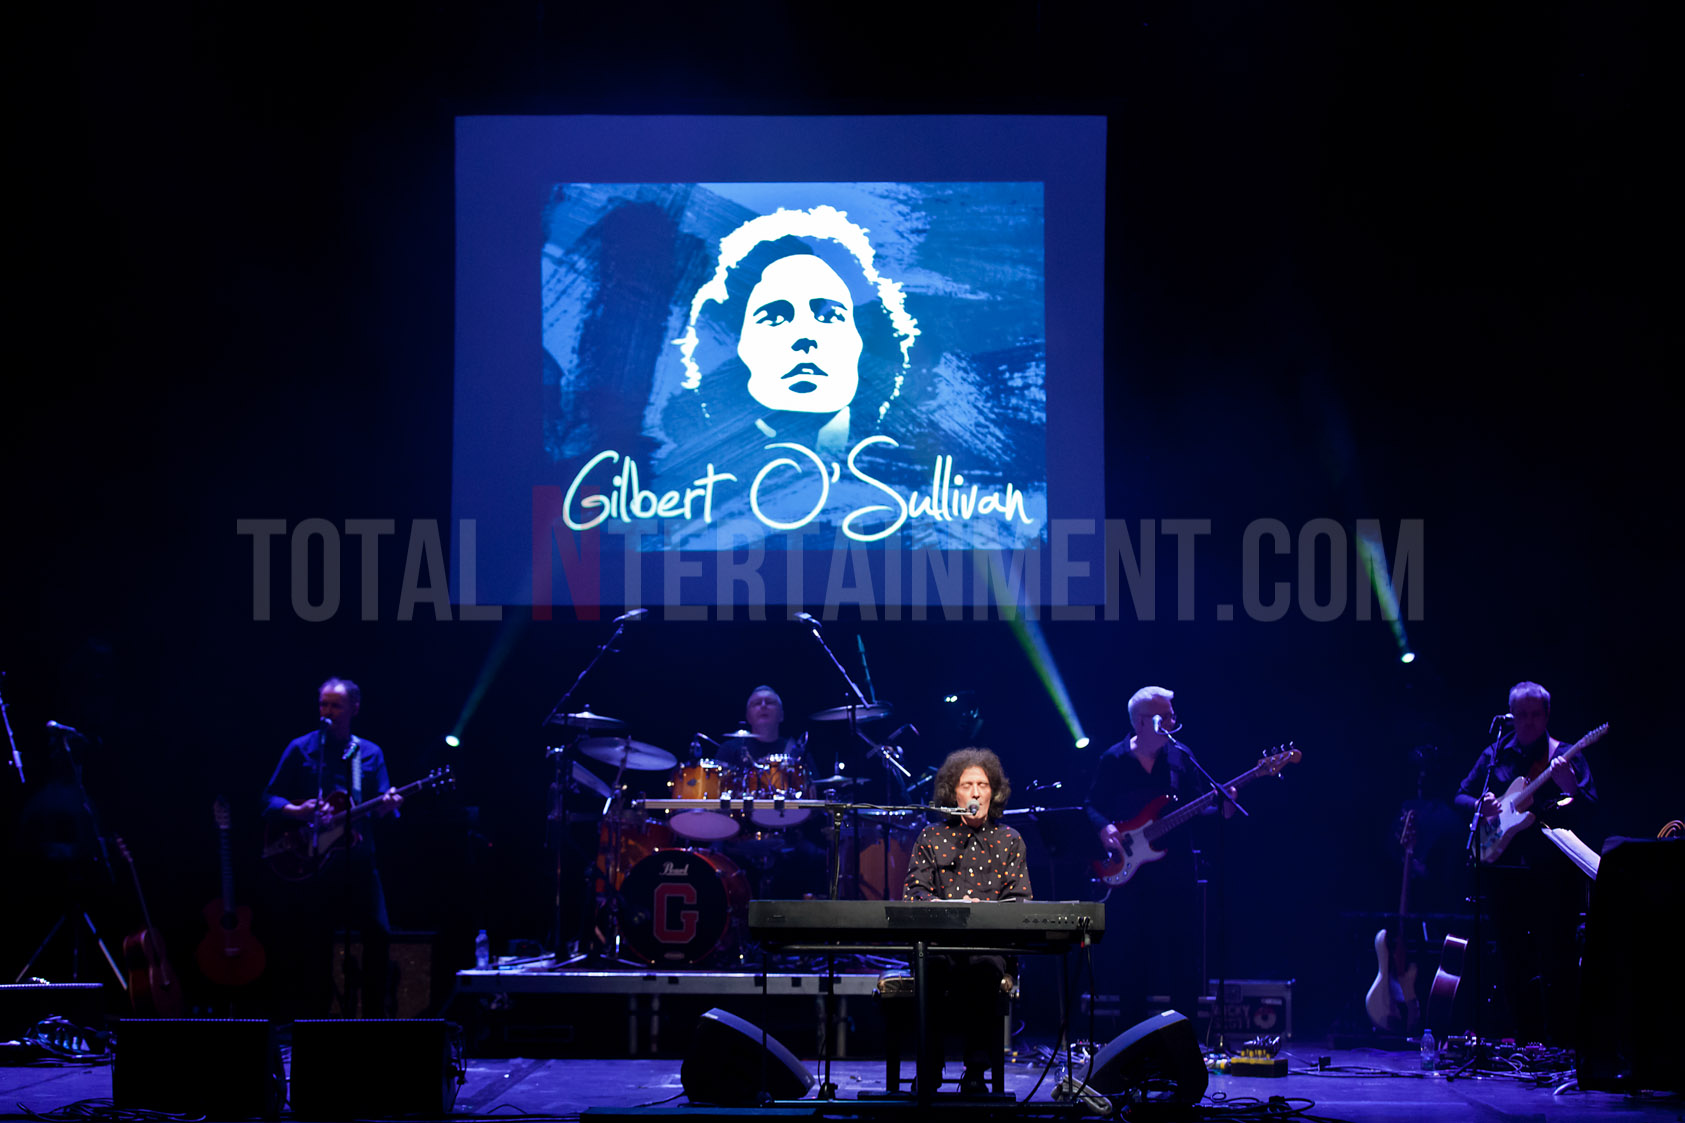 Gilbert O’Sullivan back in Liverpool, the place he calls his second home